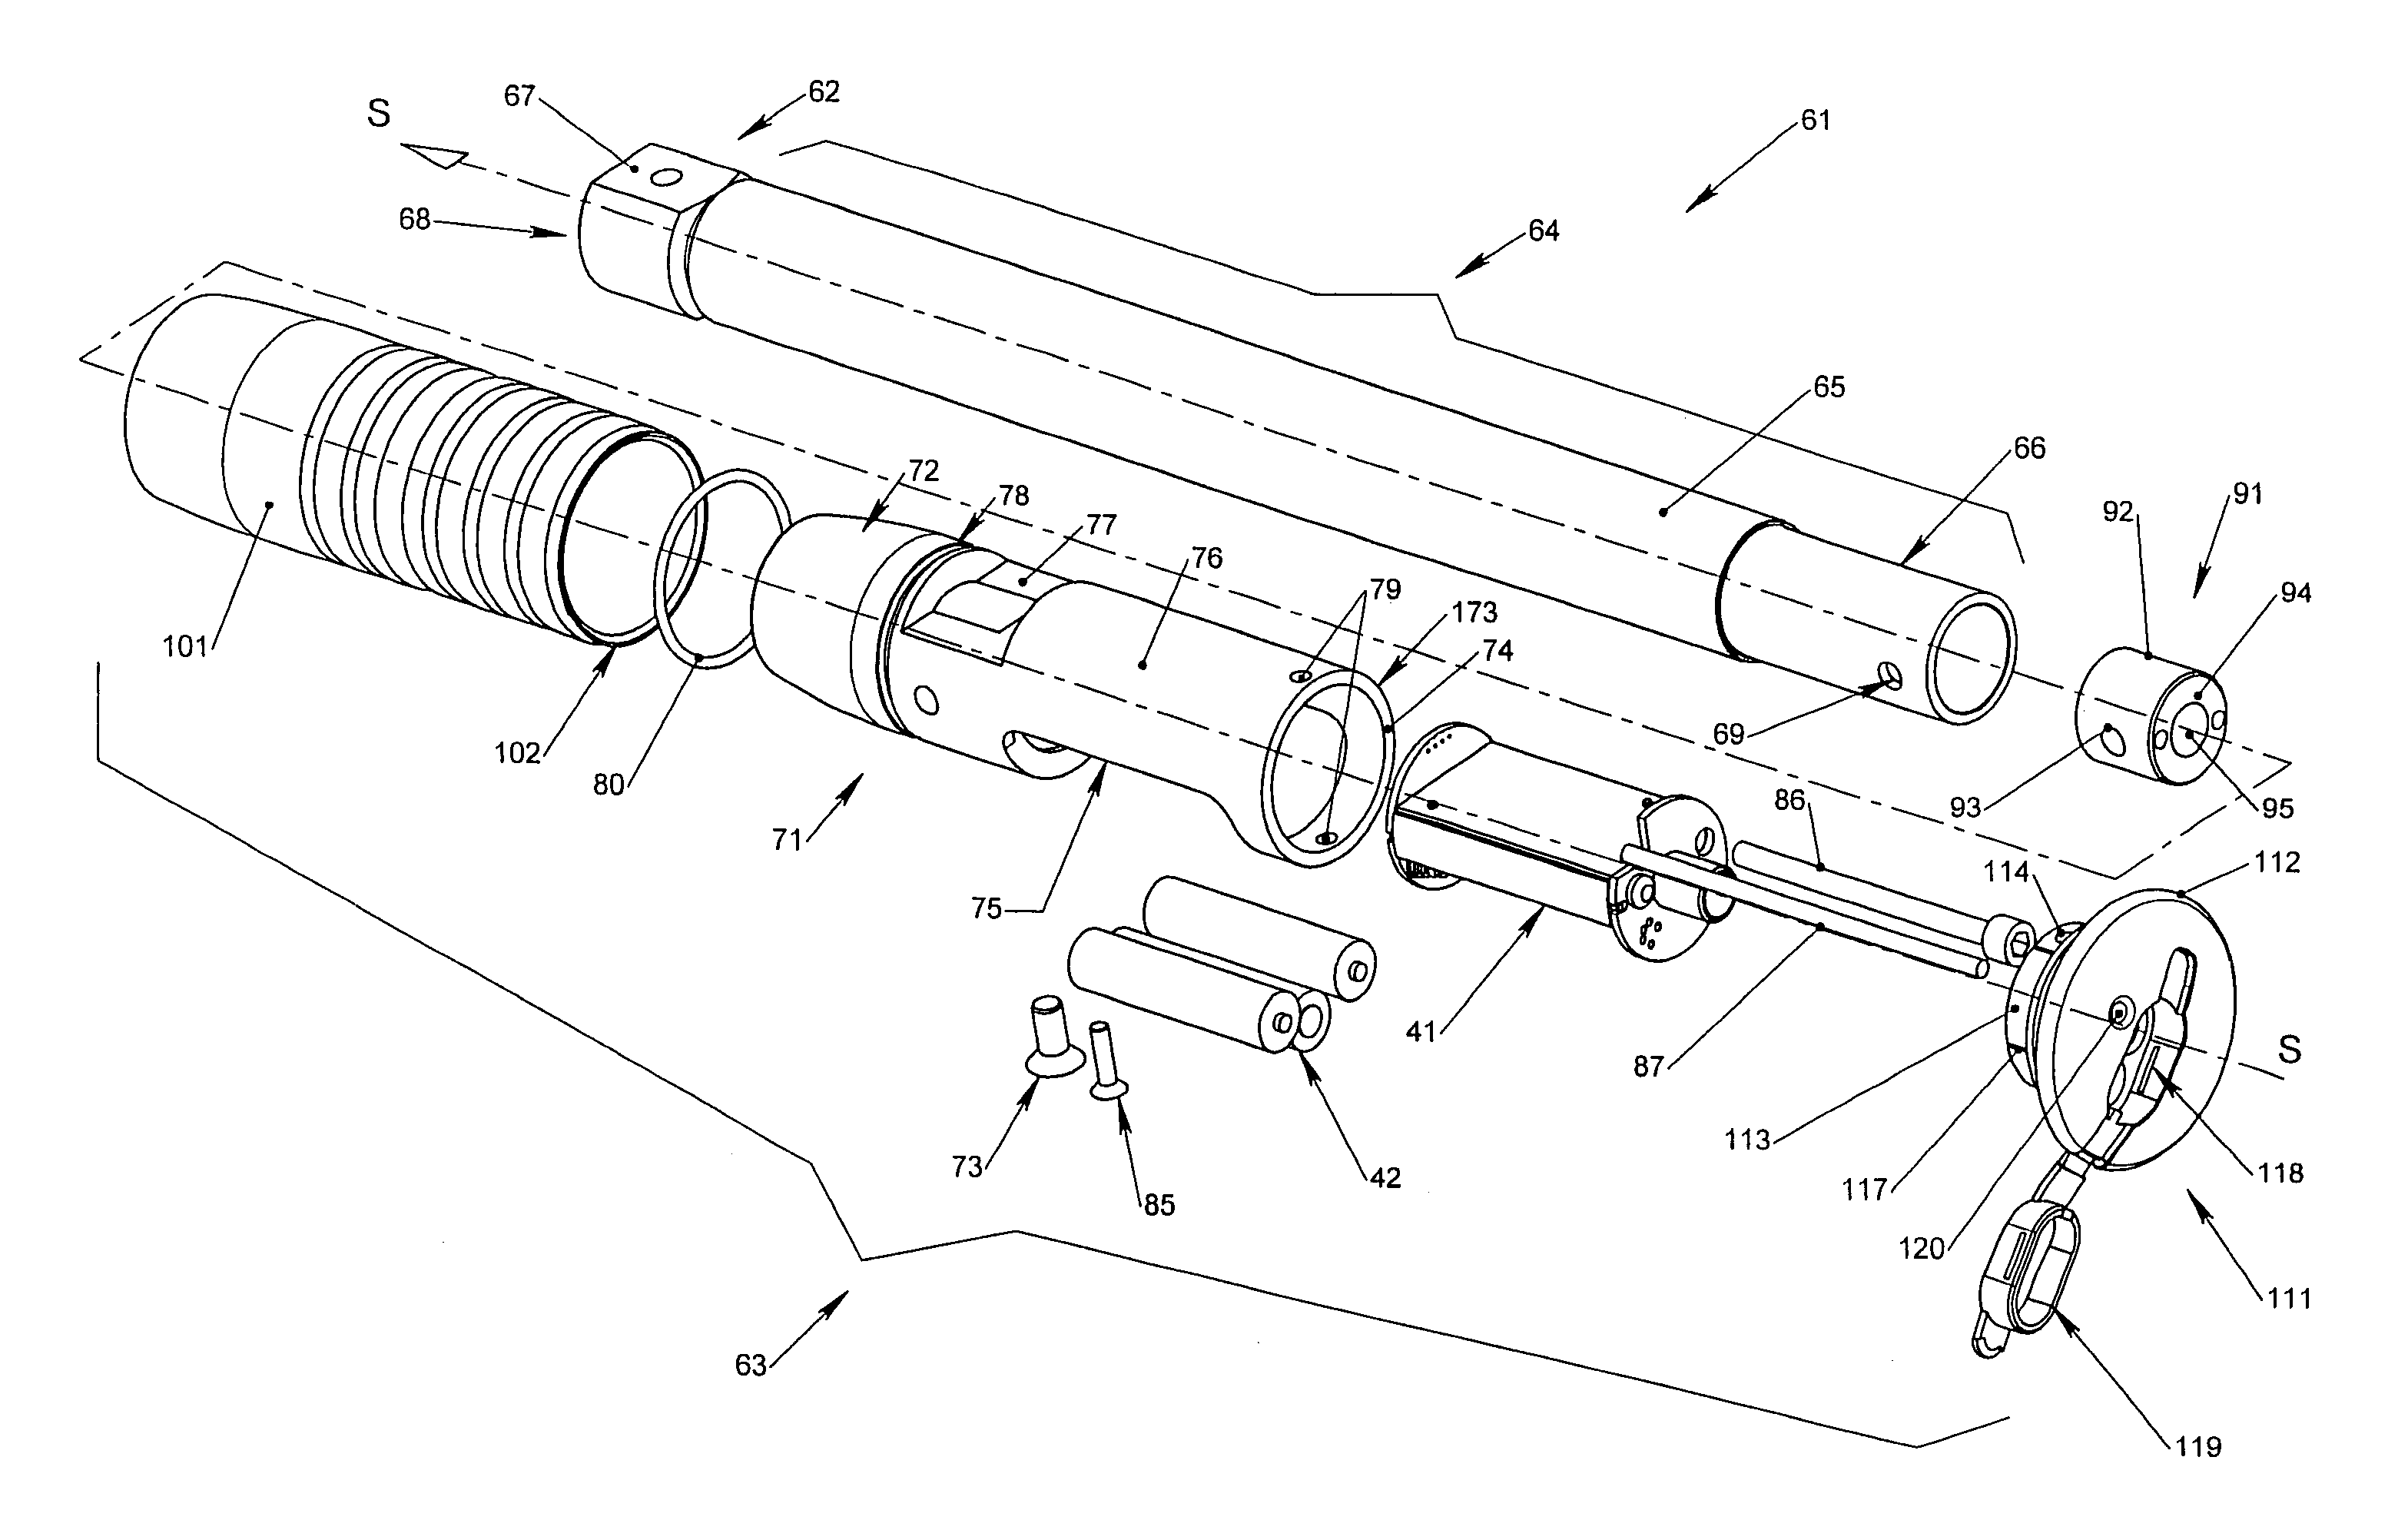 Support for electrical/electronic structure and/or electrical power supply structure for a hand dynamometer tool, in particular for a torque wrench operating by breaking mechanical equilibrium